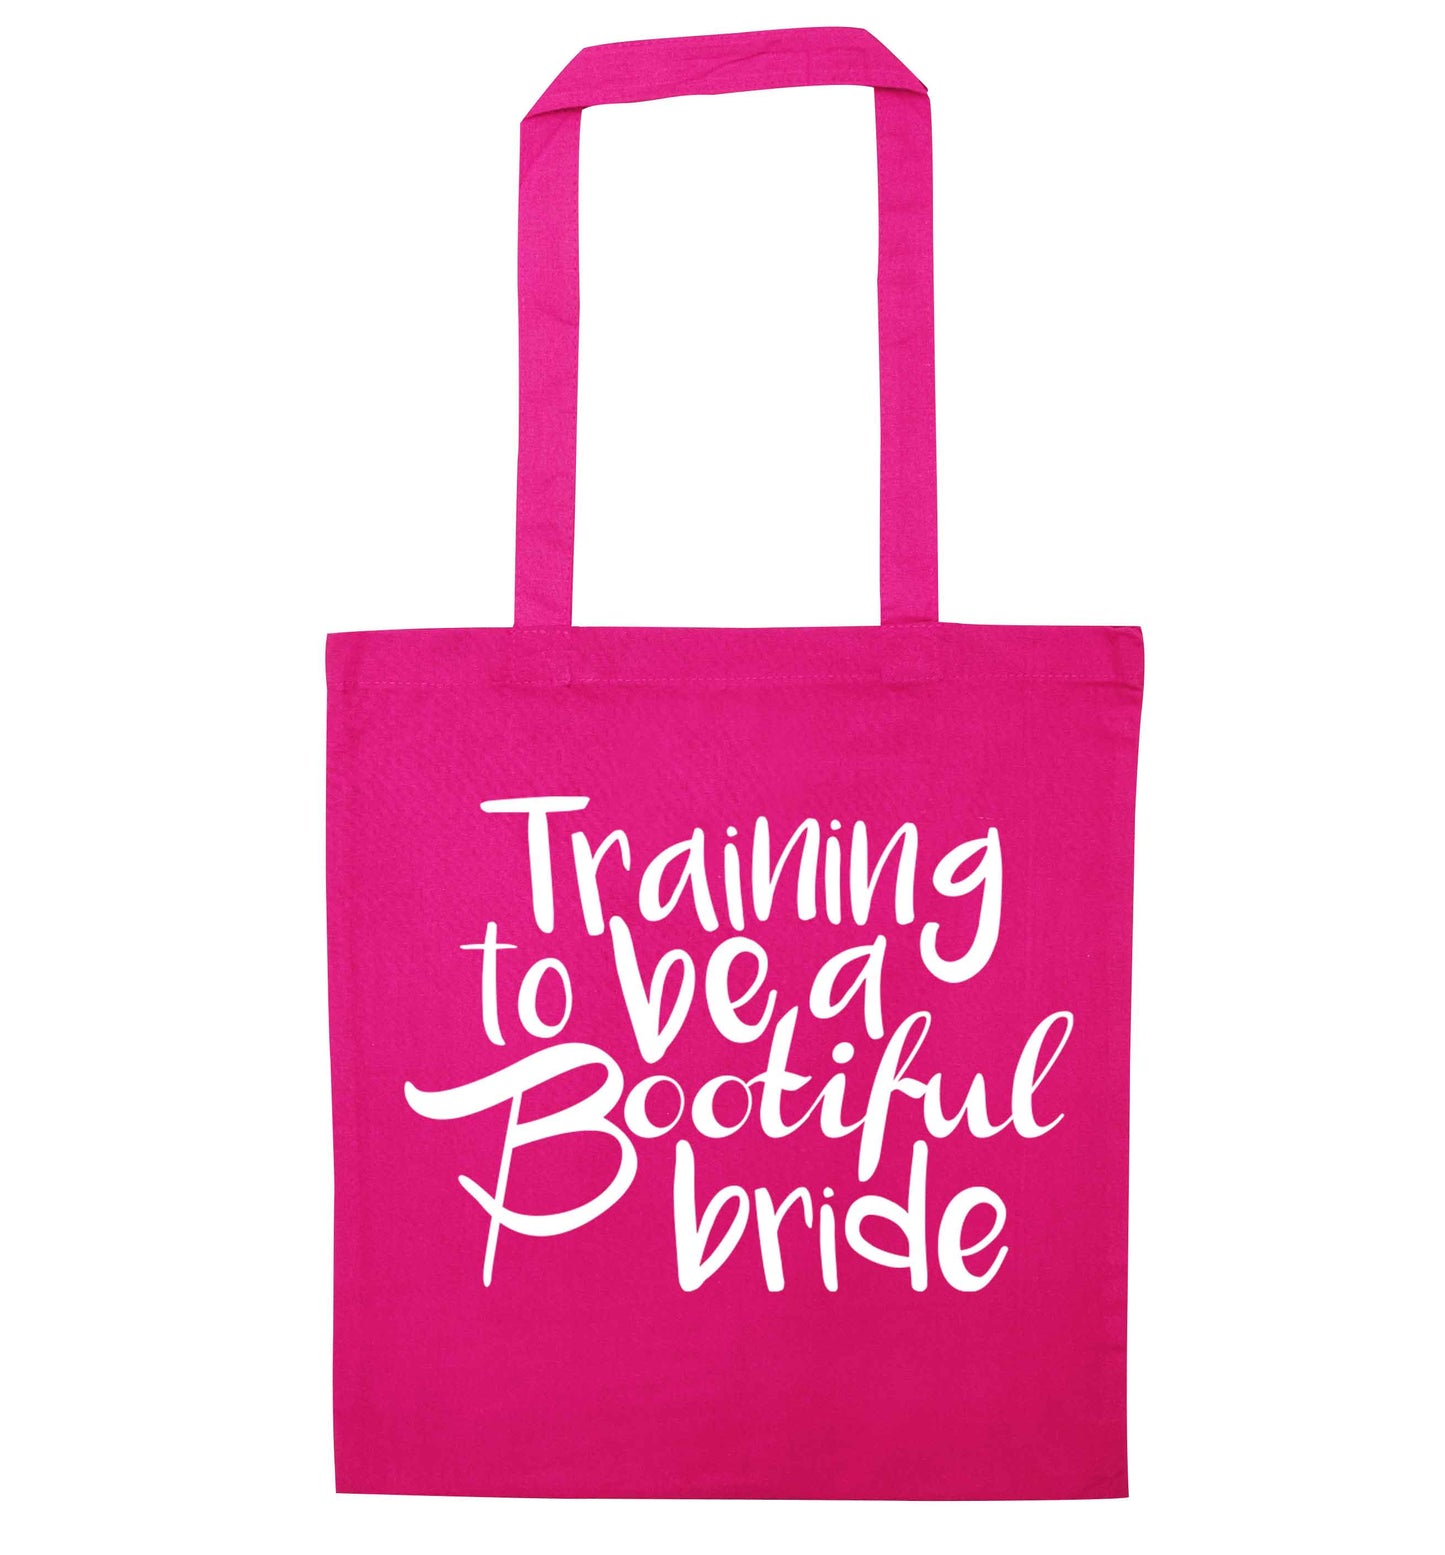 Get motivated and get fit for your big day! Our workout quotes and designs will get you ready to sweat! Perfect for any bride, groom or bridesmaid to be!  pink tote bag